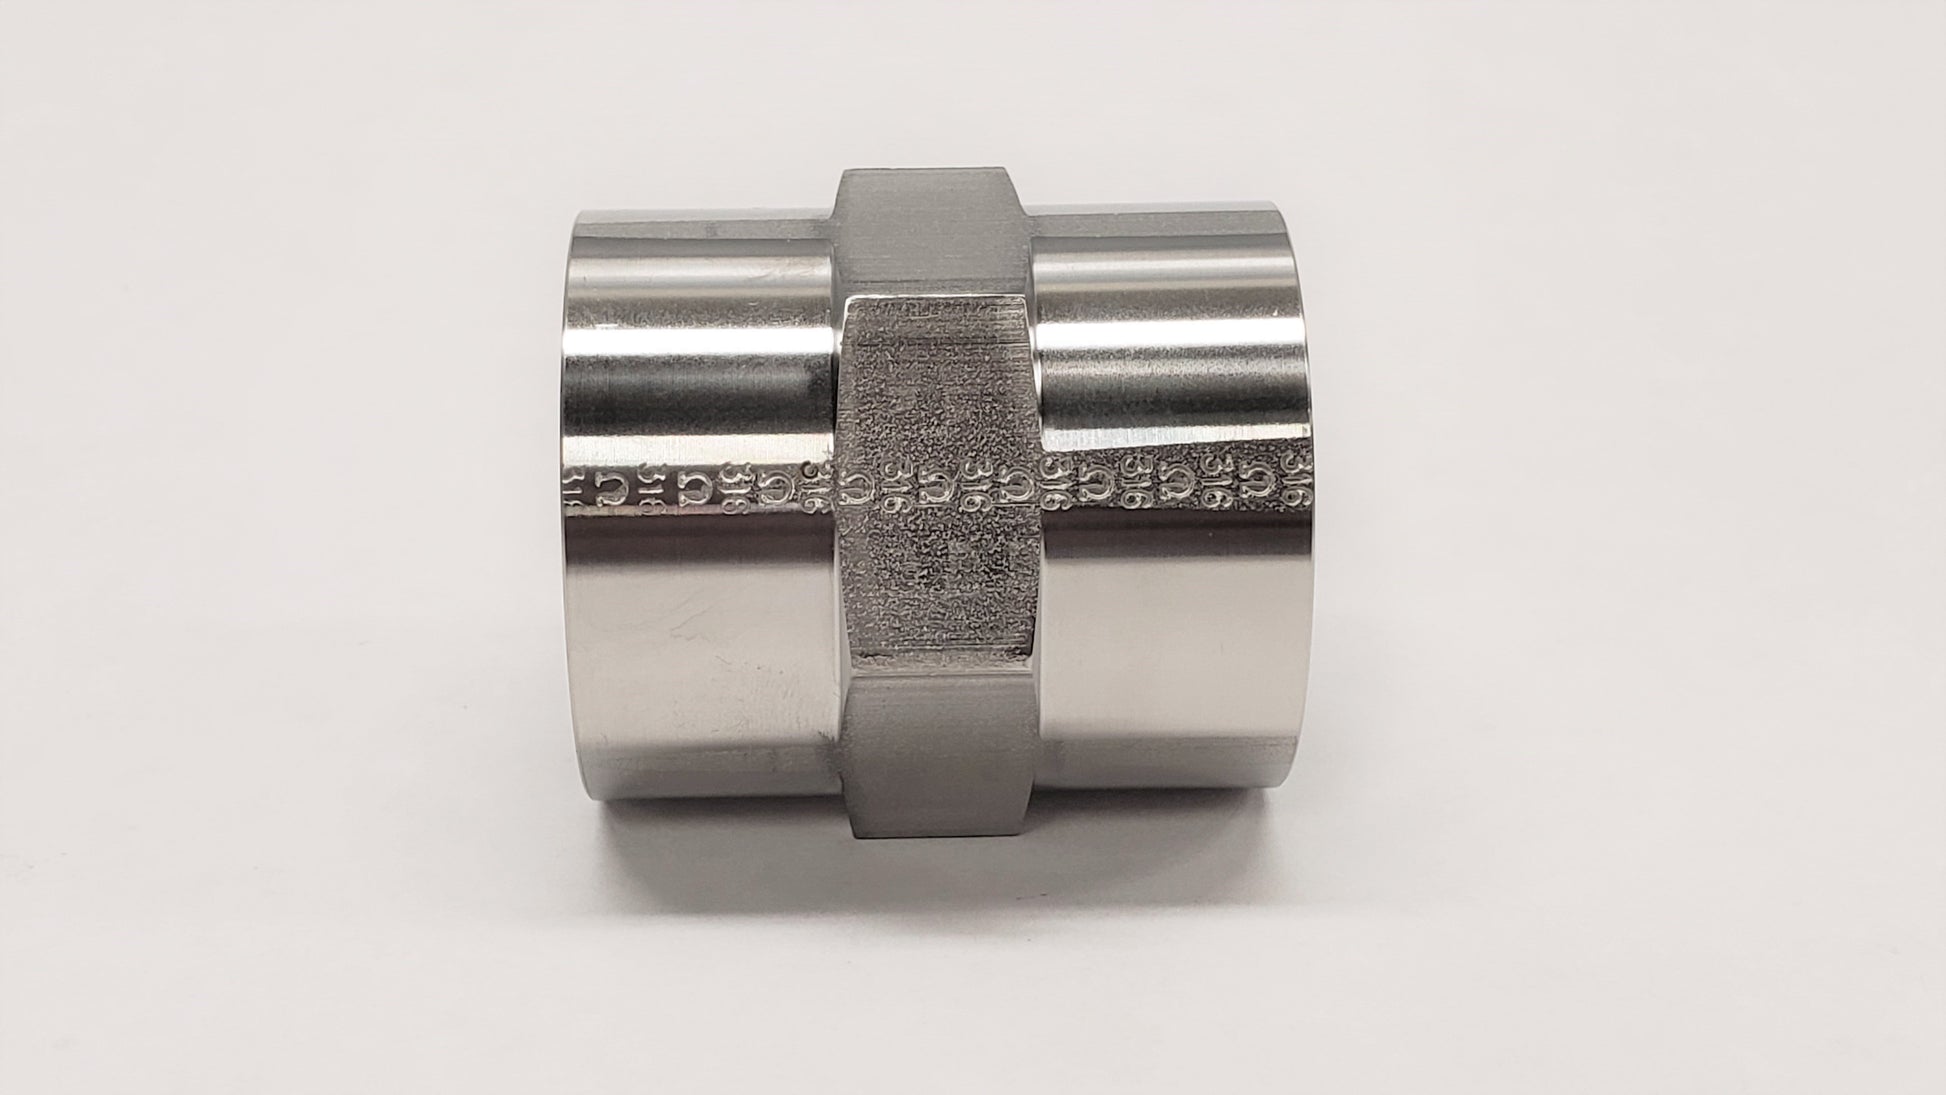 5000 - Female NPT Pipe Coupling - Jupiter Stainless & Alloy -  Buy Metals Online.